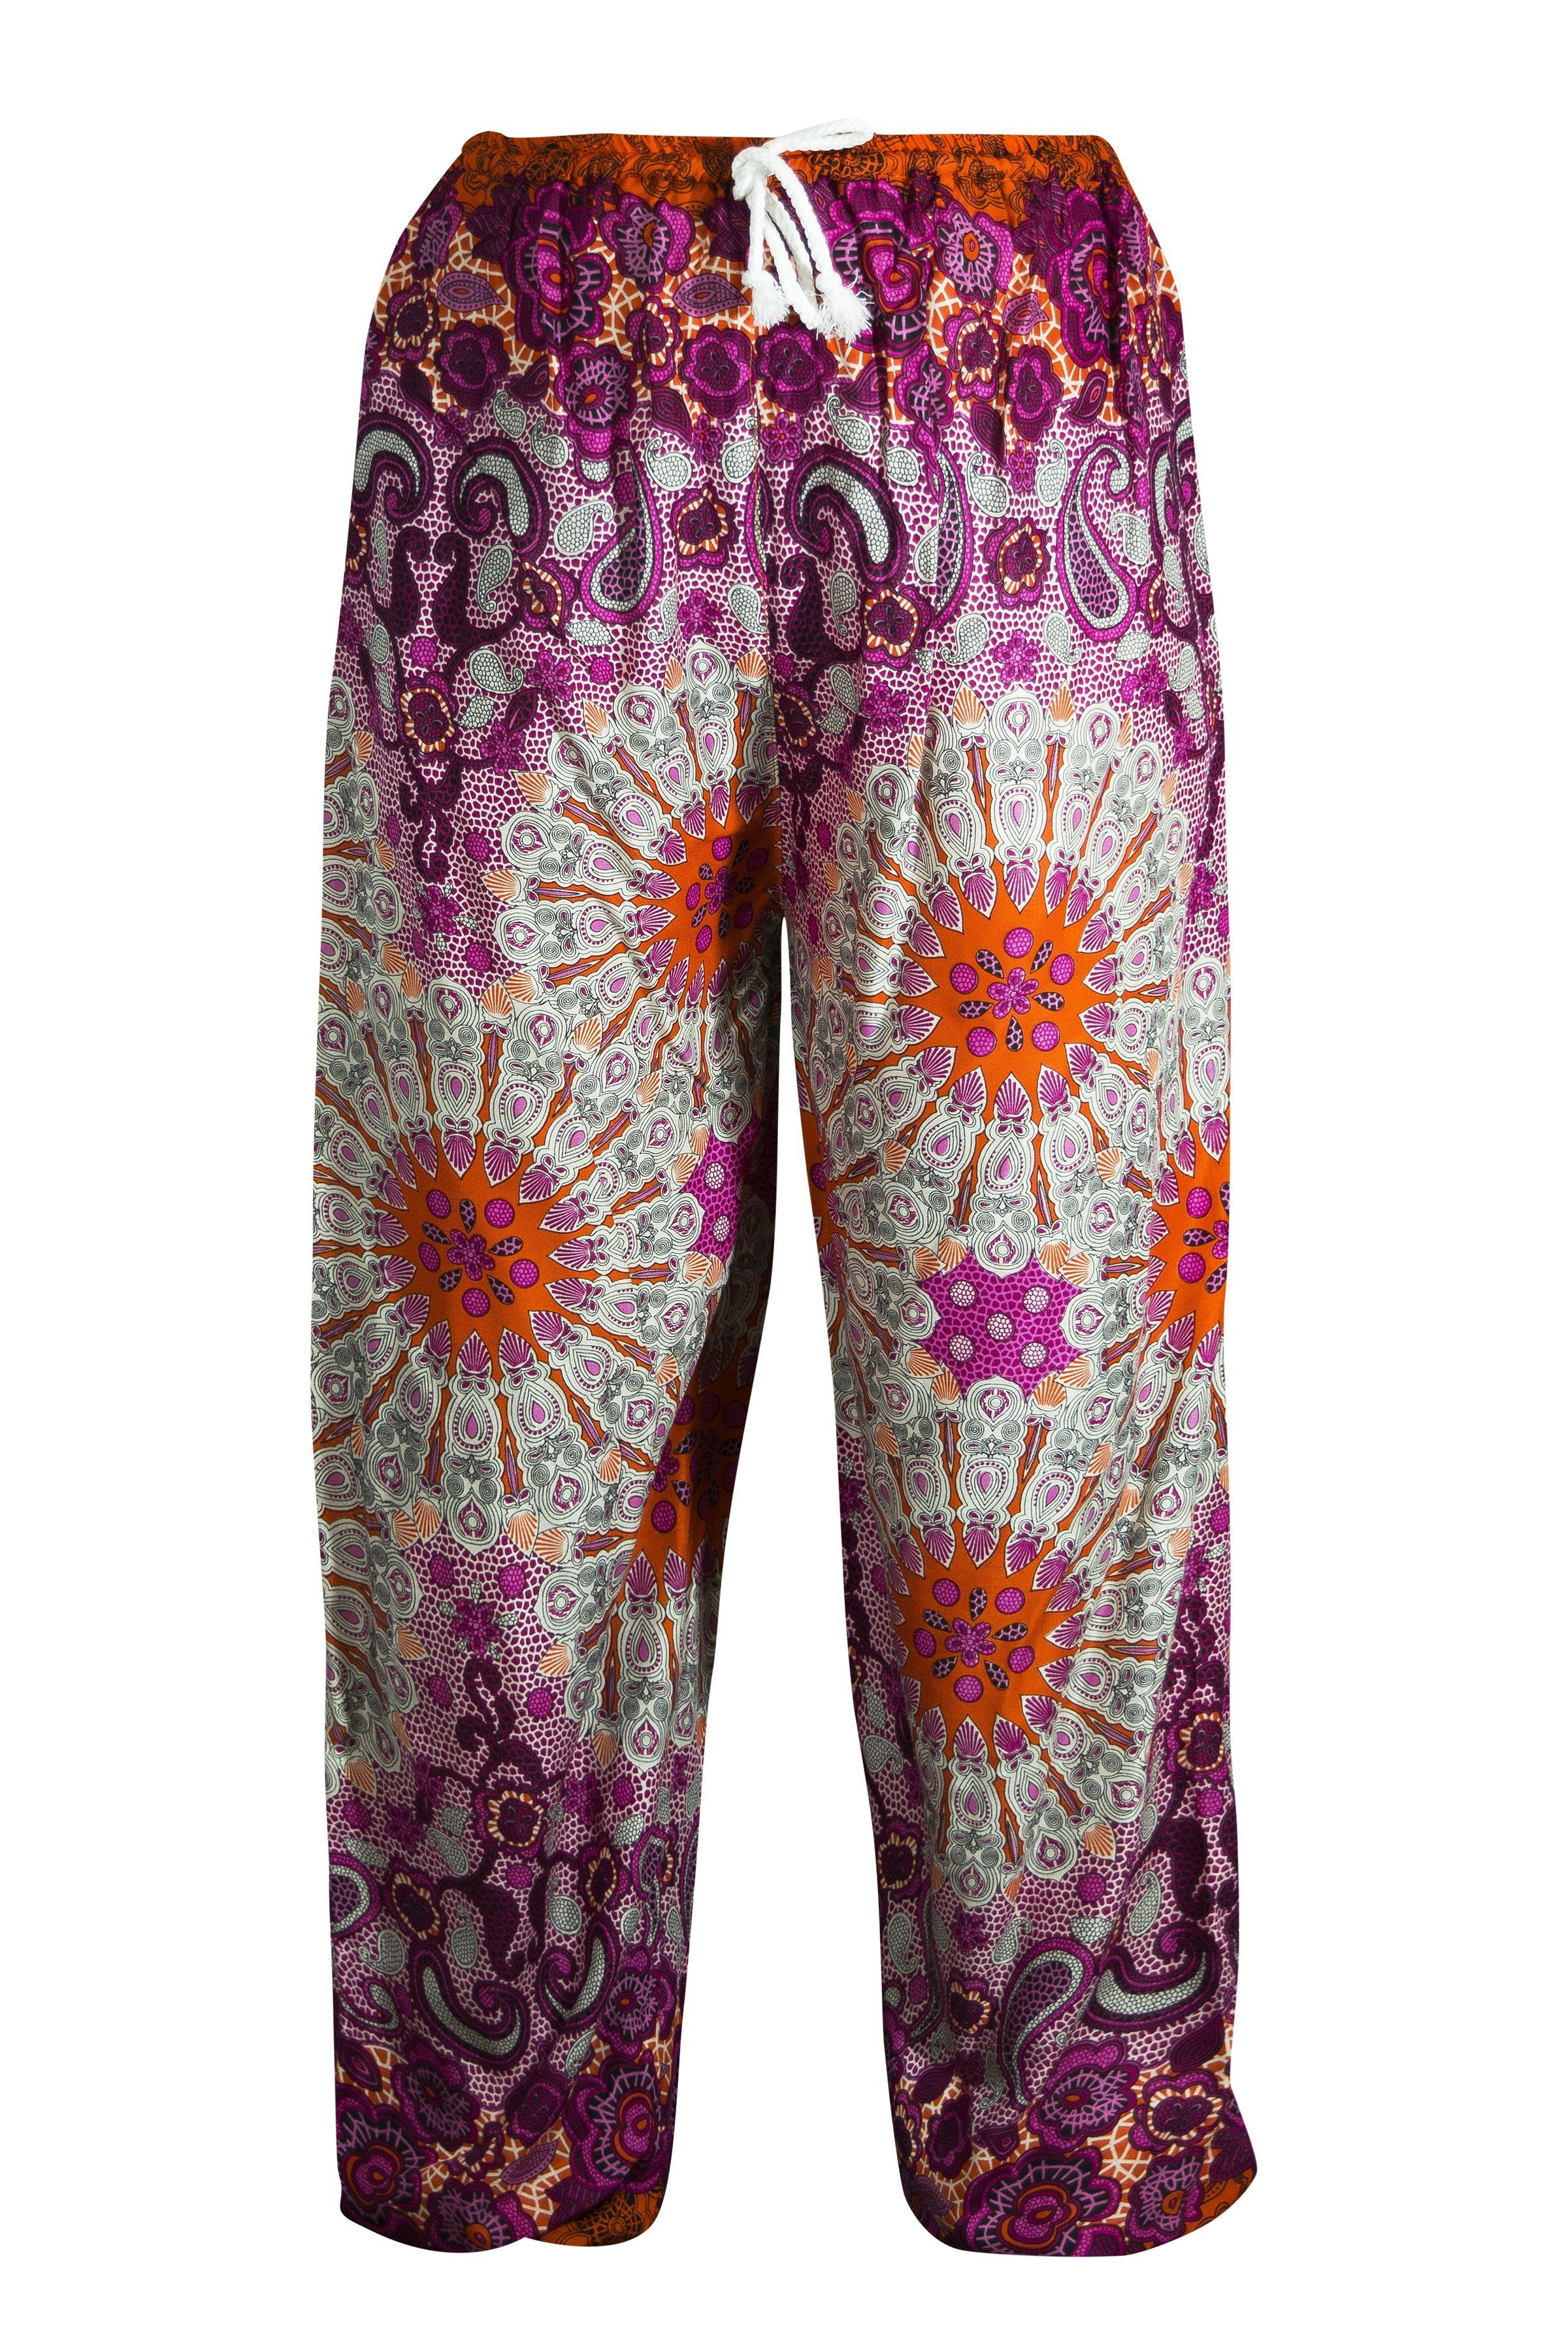 Buy Tina Silk Pantaloon, One Size gypsy High Crotch Harem Trousers  SKU:840-6202 Online in India - Etsy